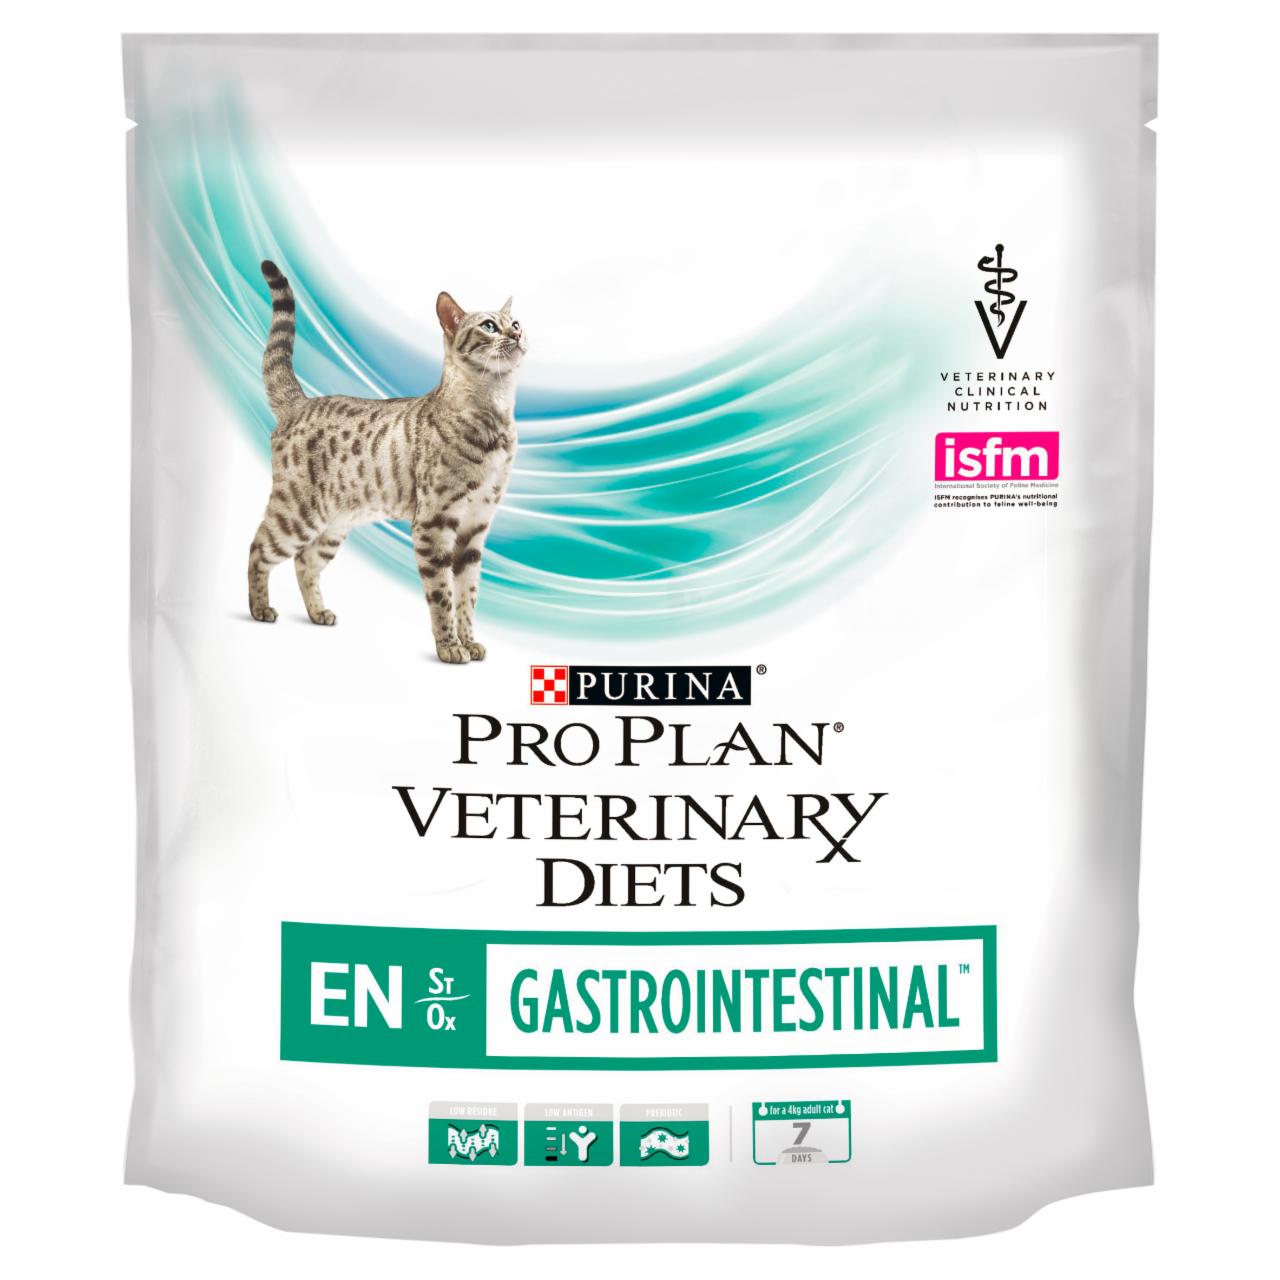 Photo - PRO PLAN Veterinary Diets EN St/Ox Gastrointestinal Pet Food for Cats 400 g